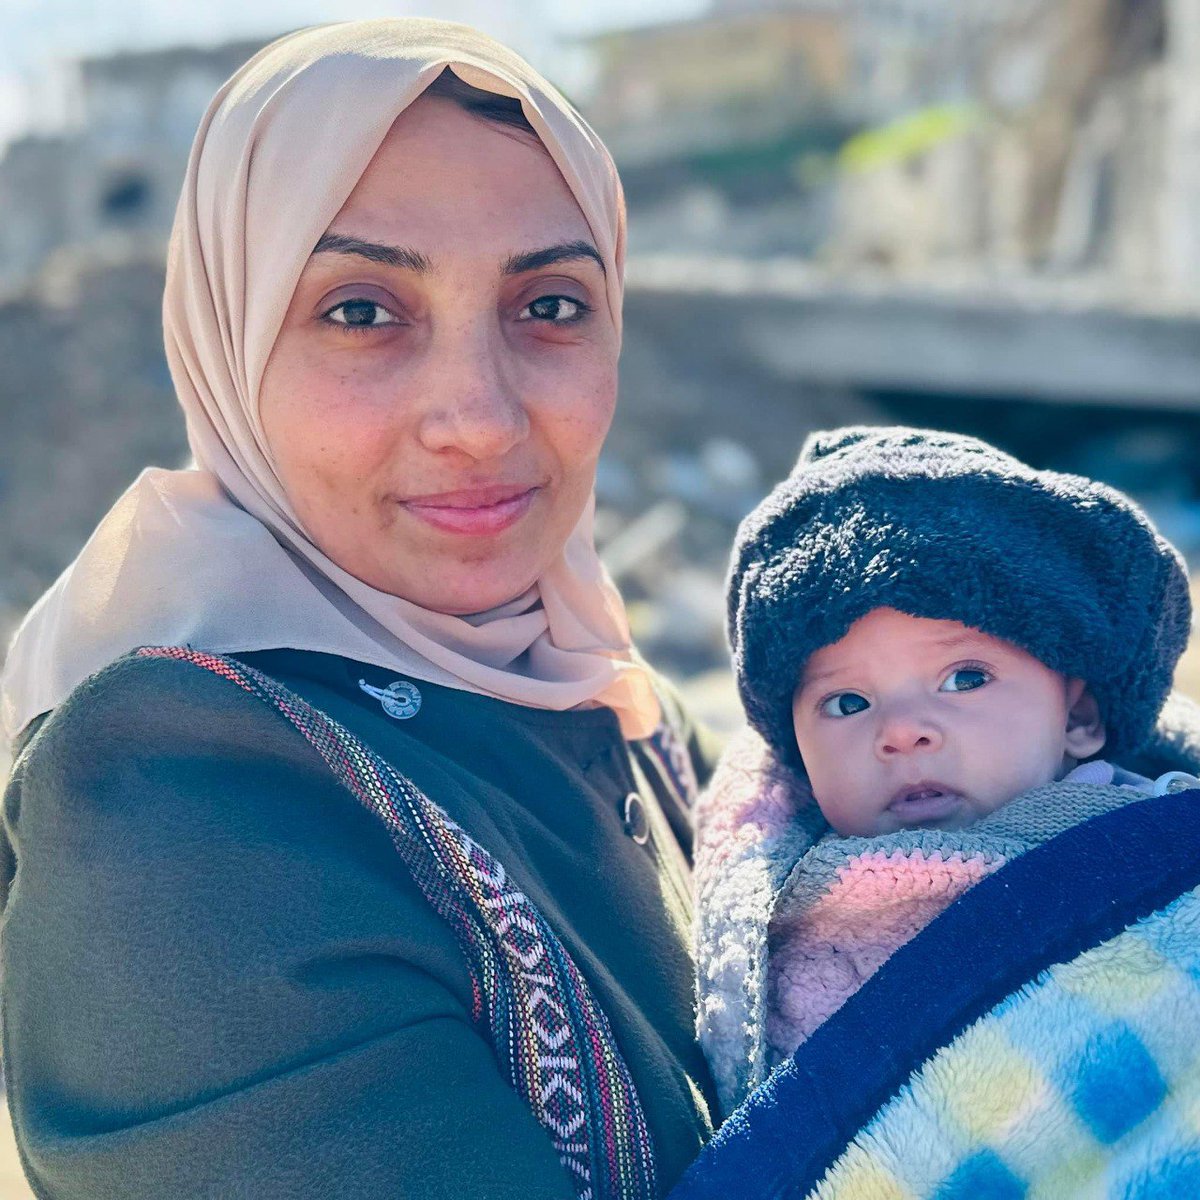 BREAKING | Journalist and author Amina Hmeid and her child have been killed in an Israeli airstrike on her home in Al-Shati' refugee camp, Gaza City, in Northern Gaza